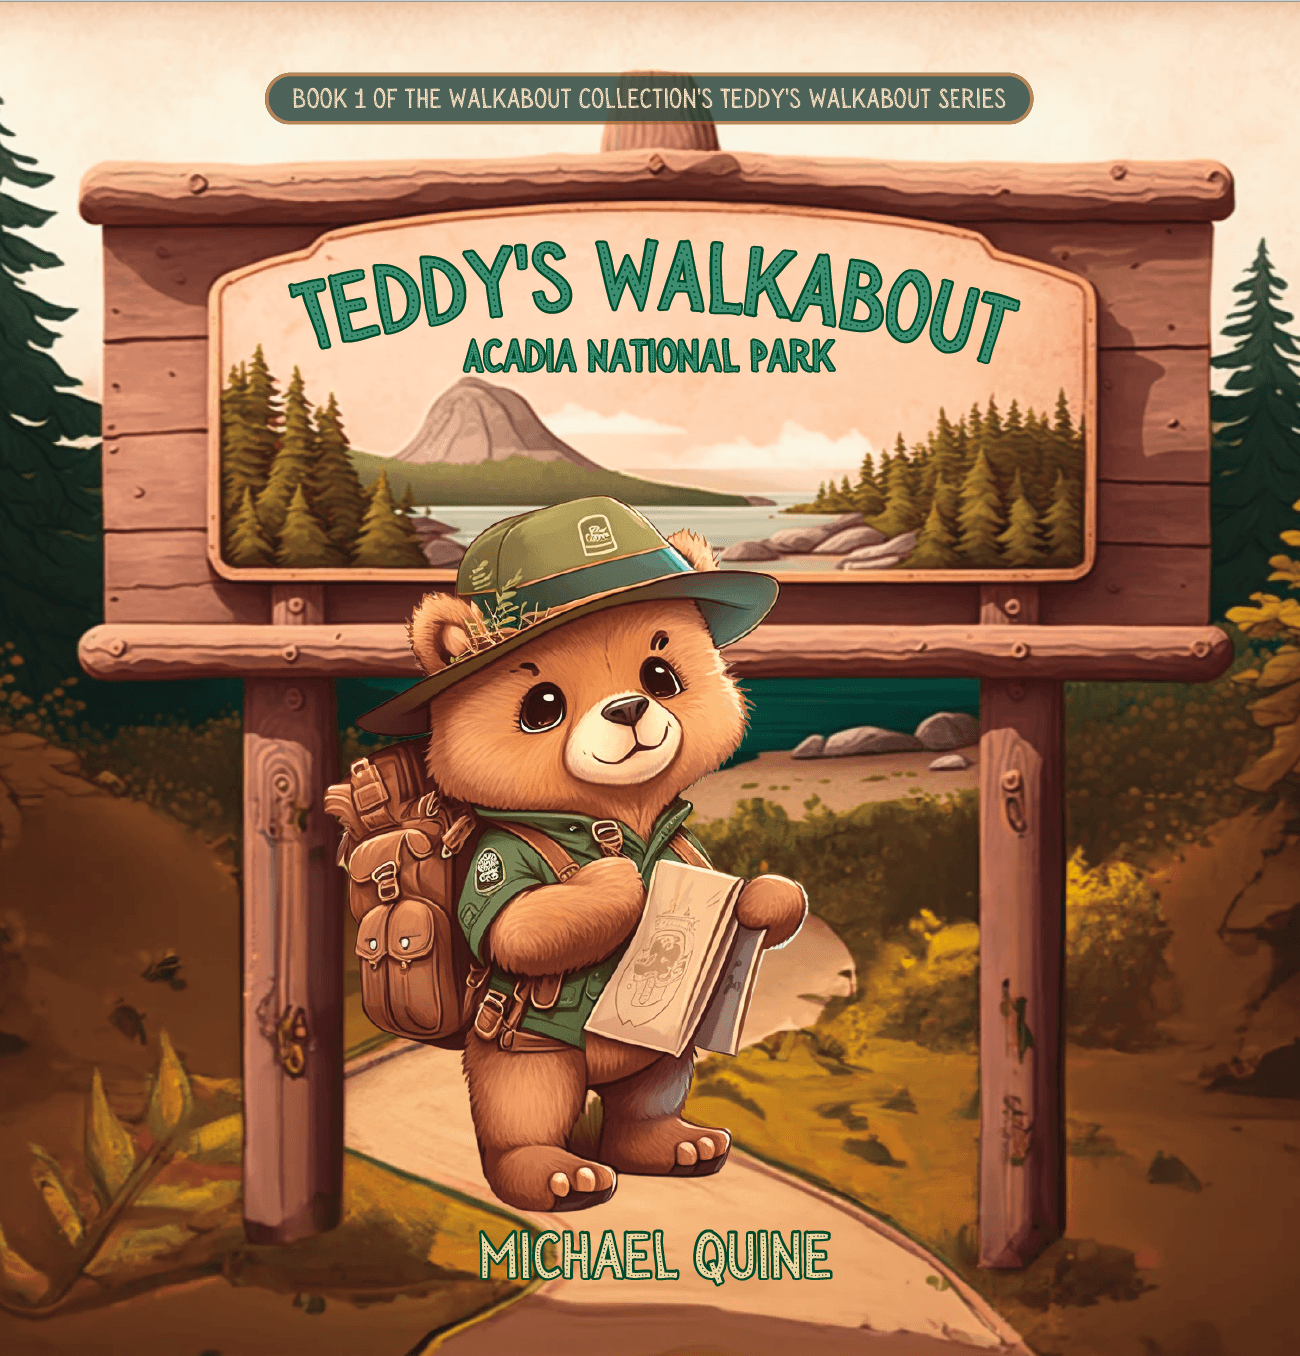 TEDDY'S WALKABOUT SERIES